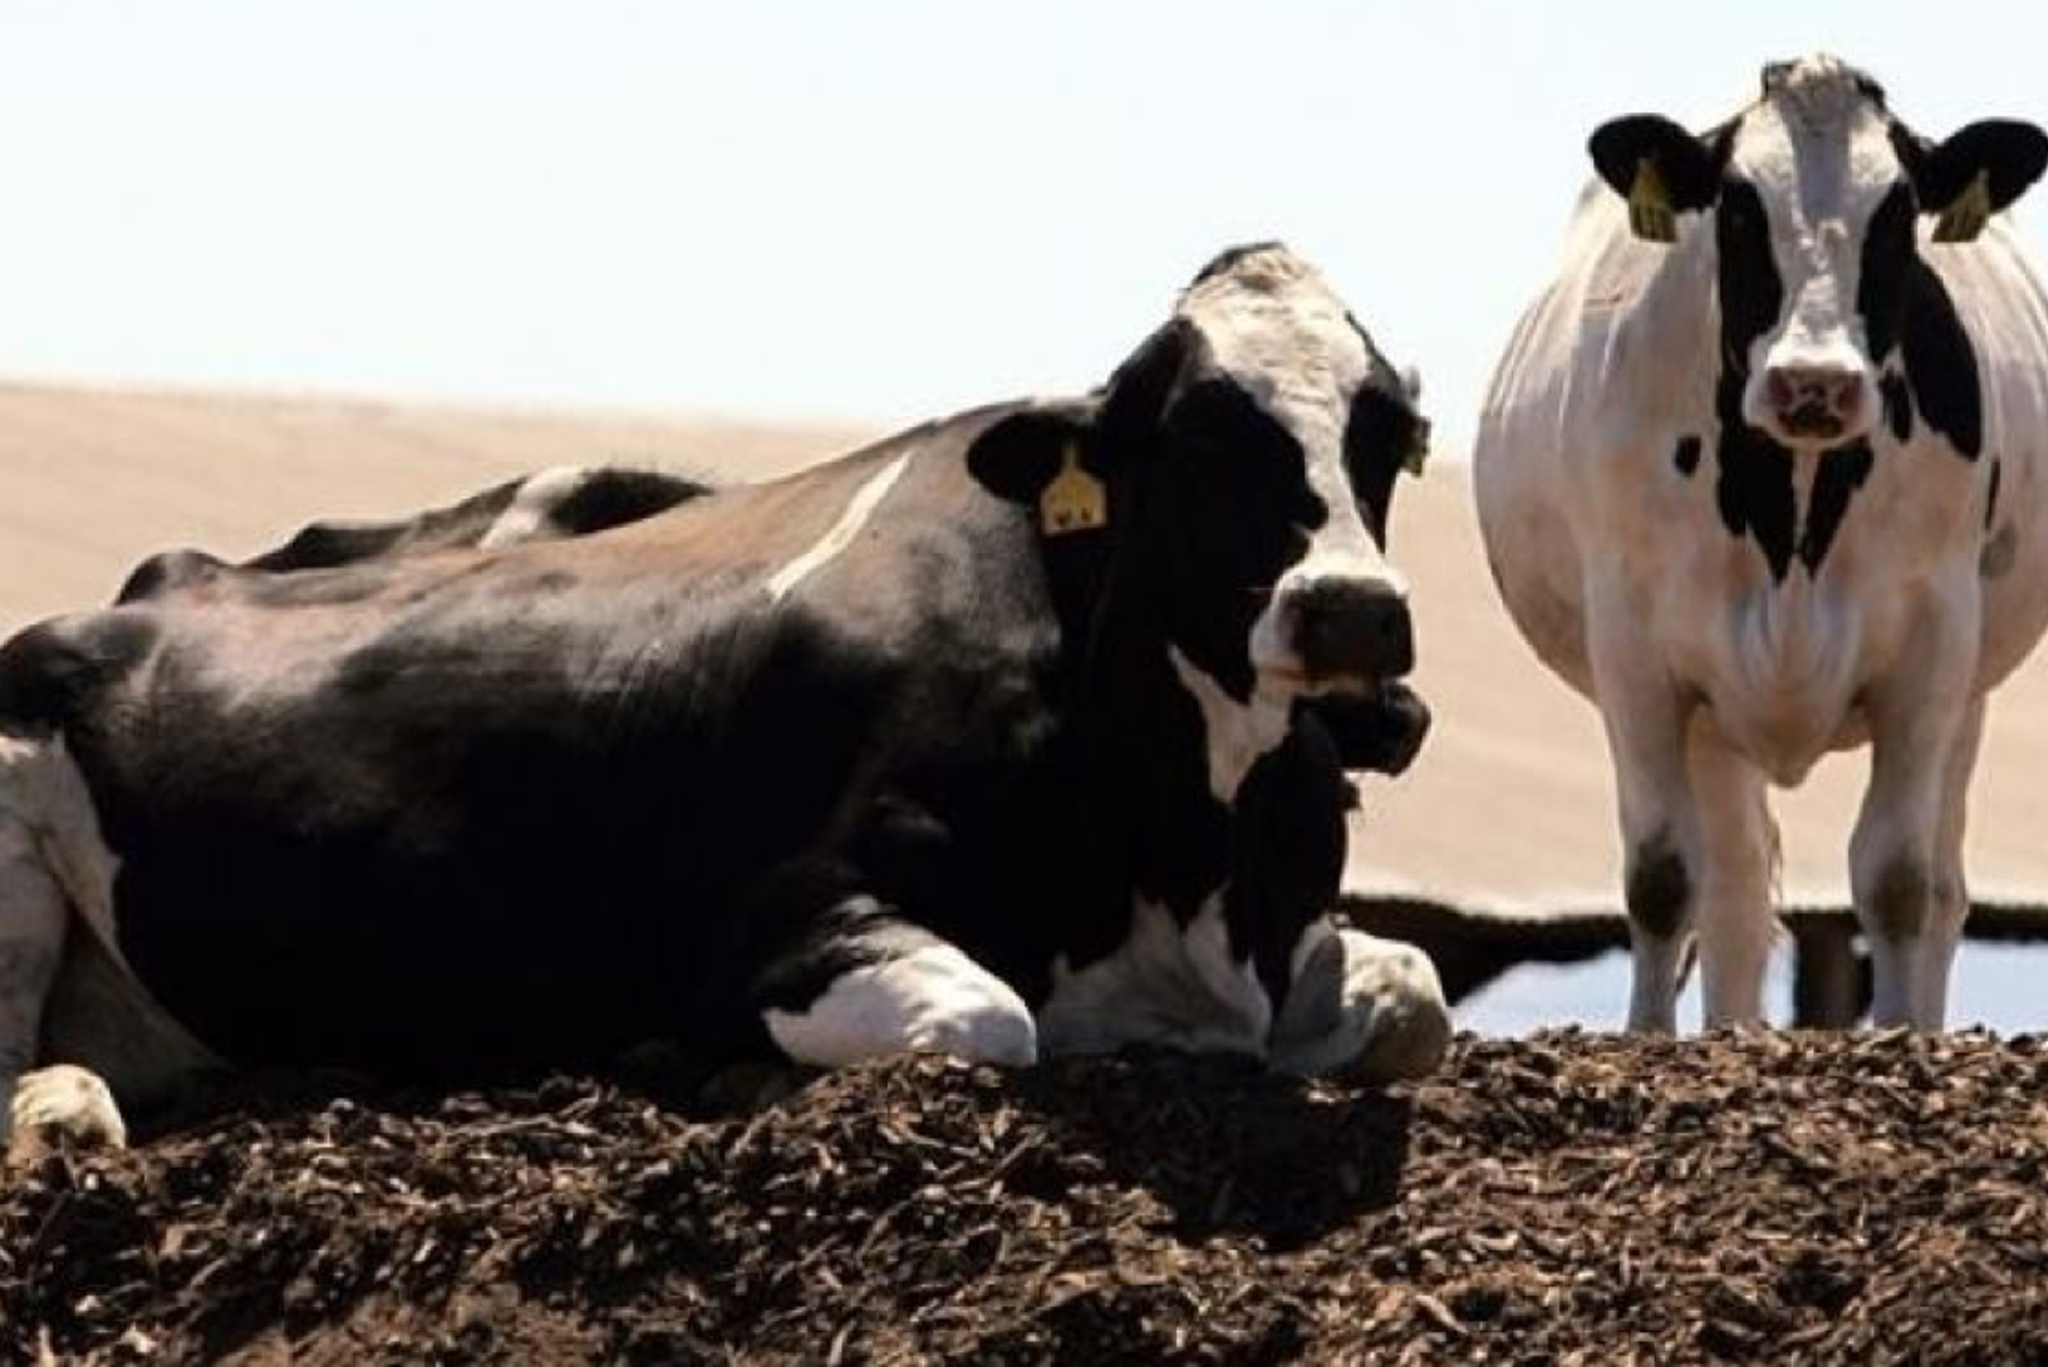 Cow farts can now be regulated in California